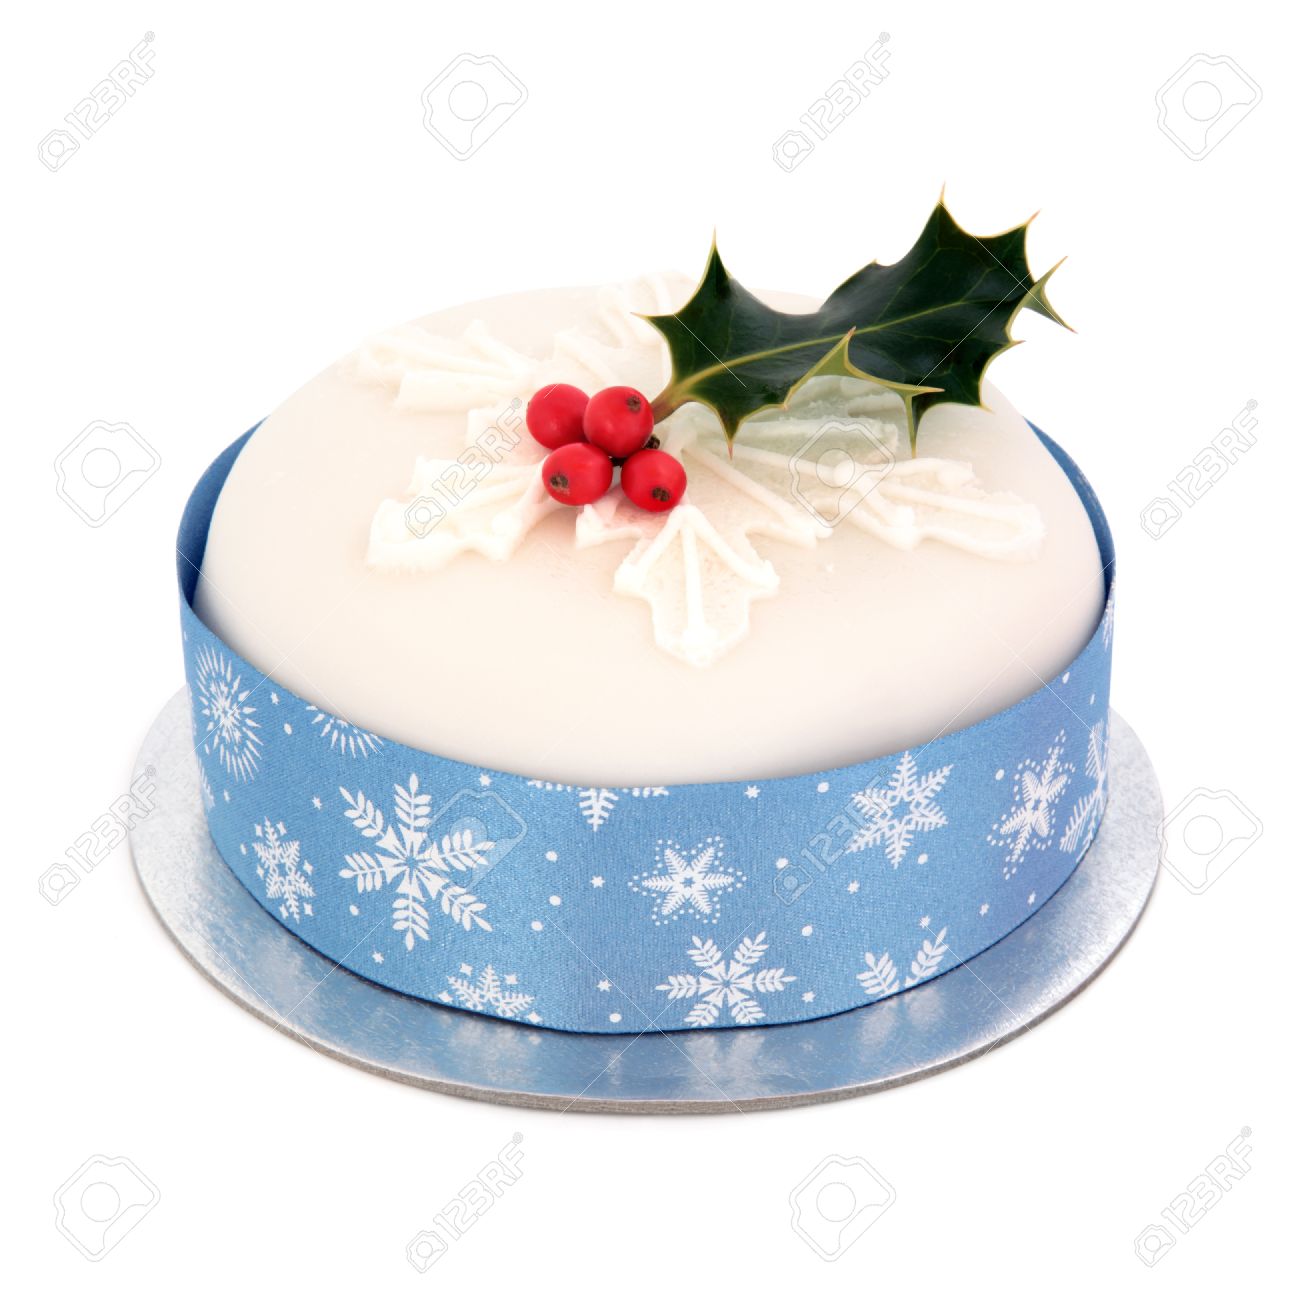 Christmas Cake With Icing Sugar Snowflake Deisgn And Holly With.